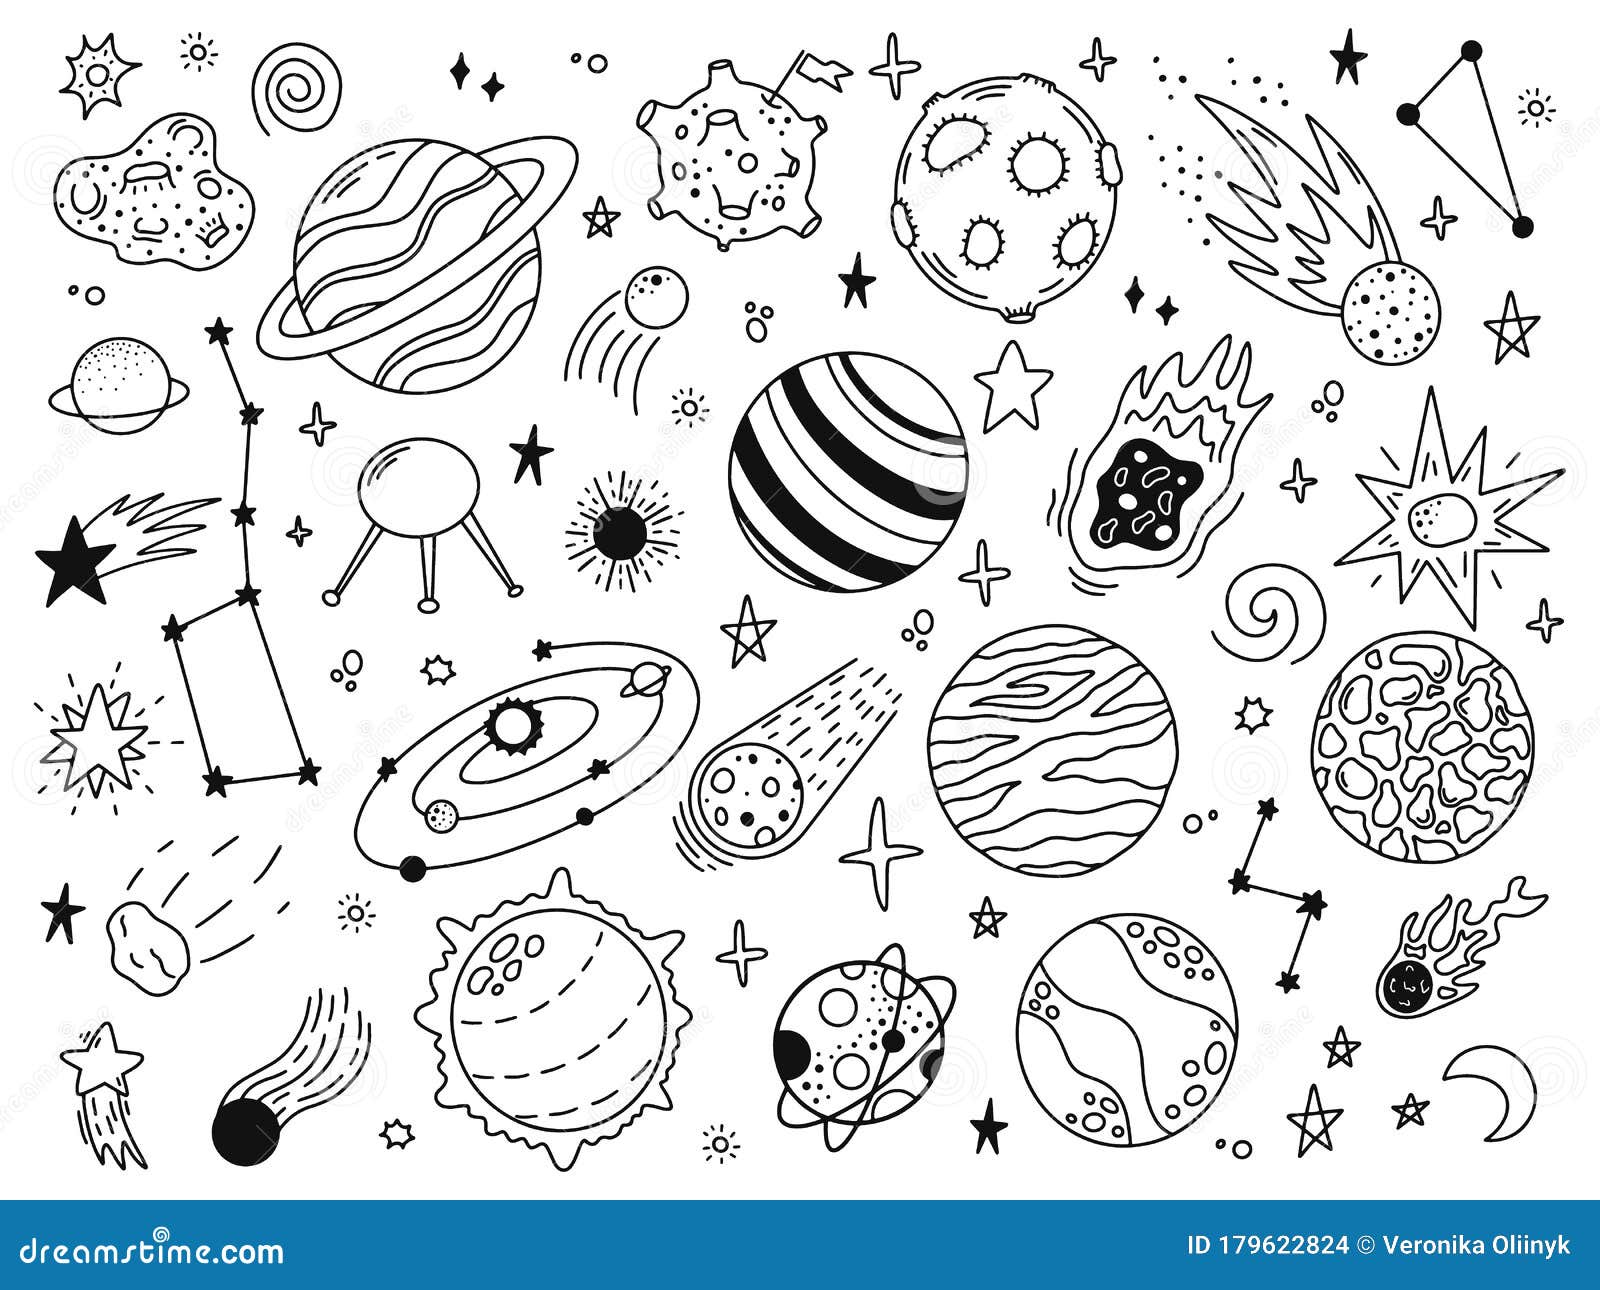 space doodles. sketch space planets, hand drawn celestial bodies, earth, sun and moon. universe space planets 